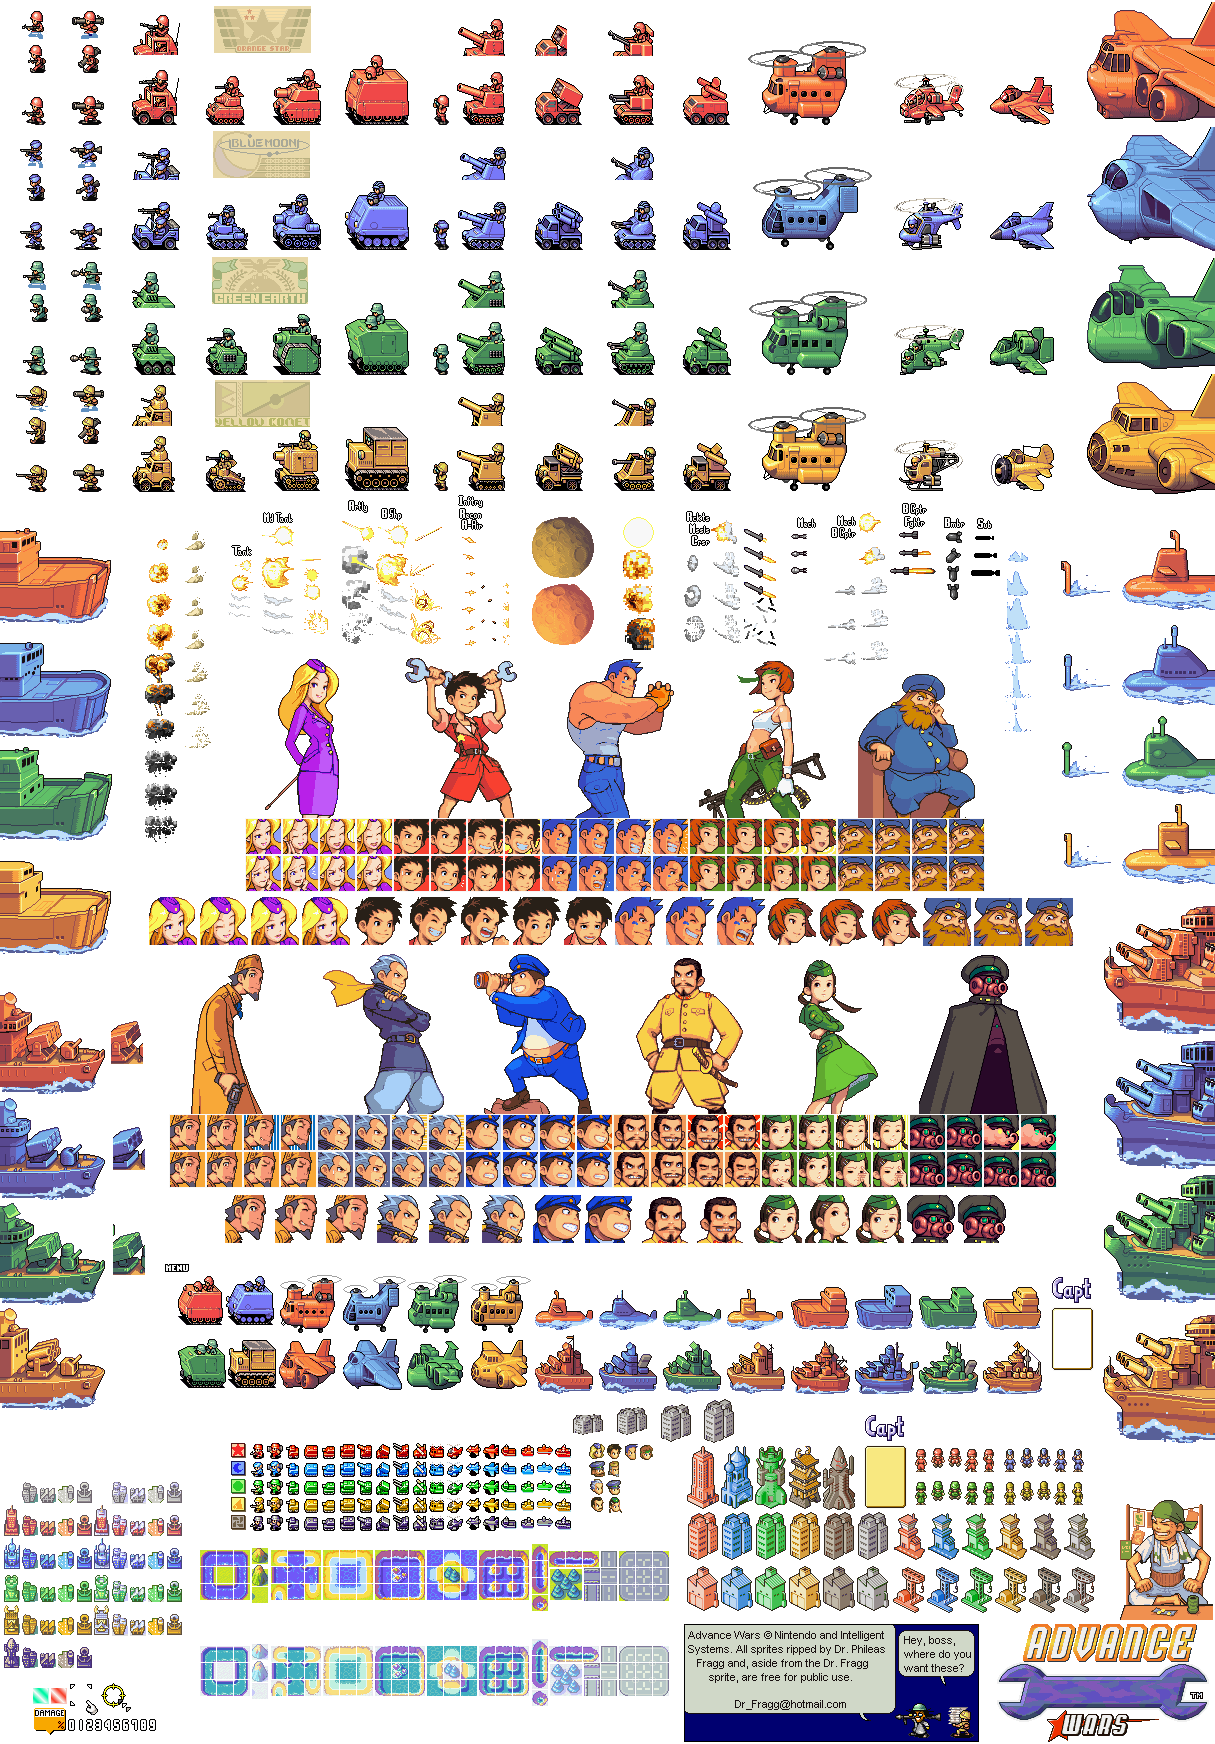 Advance Wars Pics, Video Game Collection